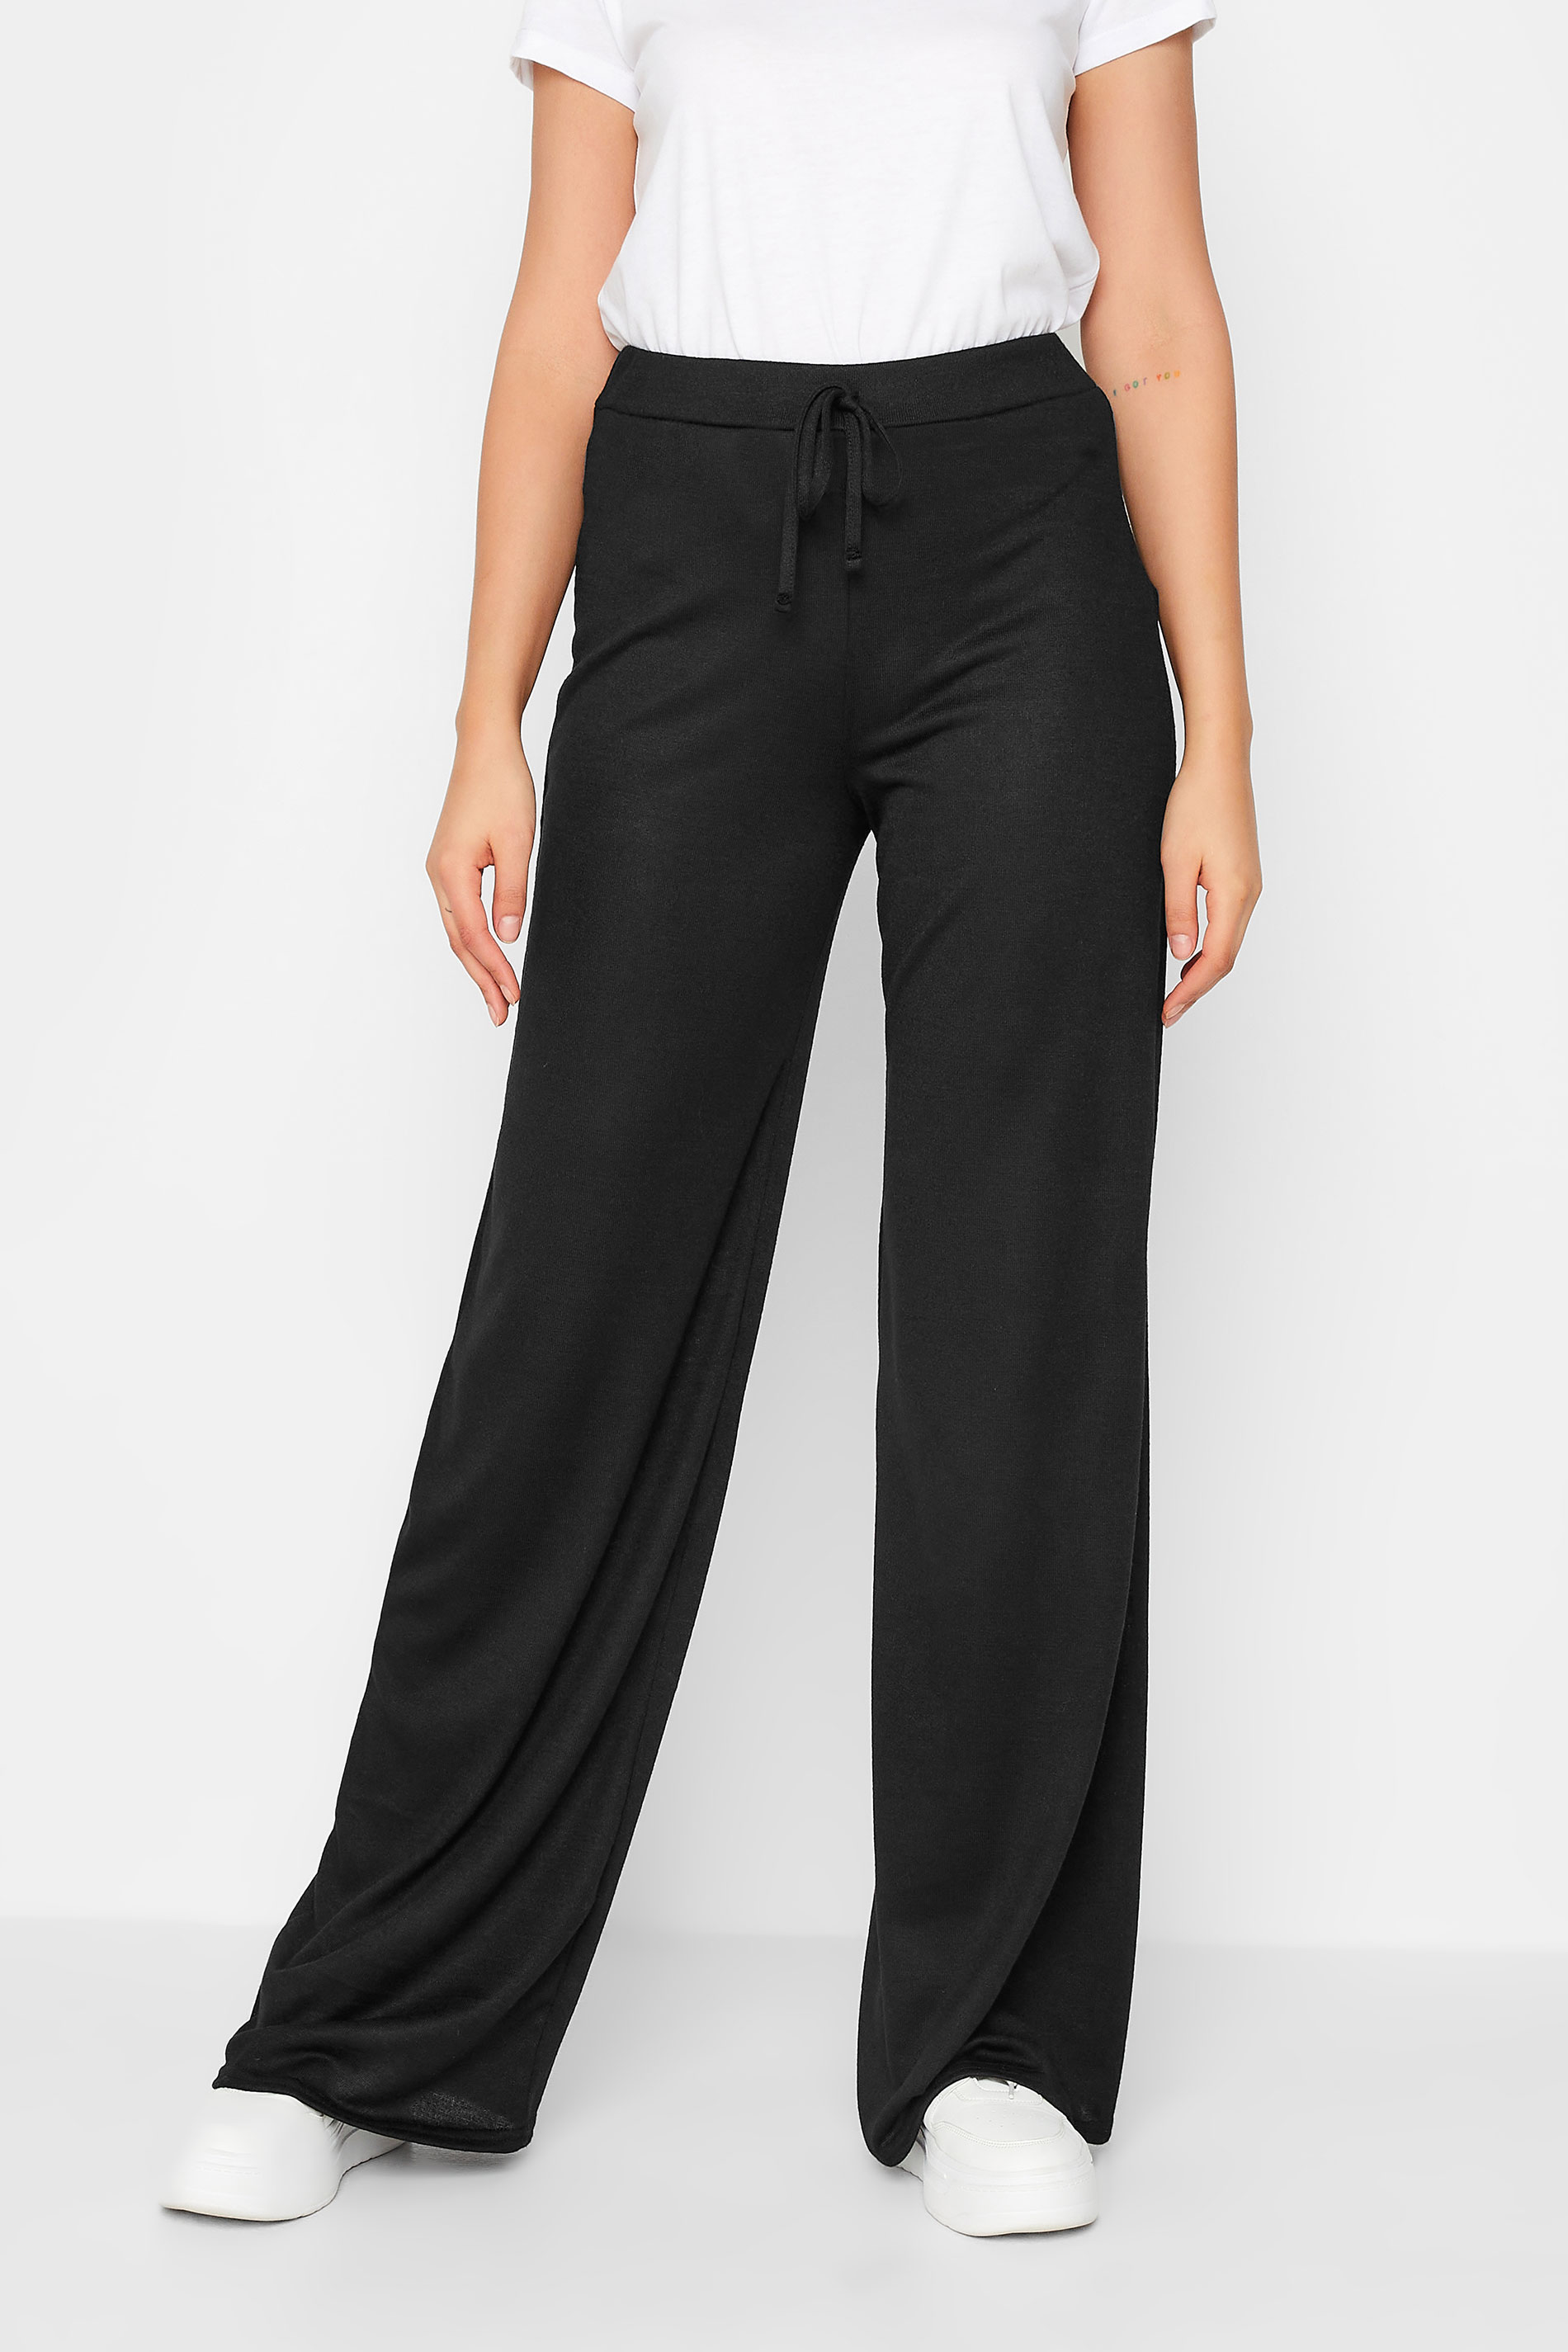 LTS Tall Black Knitted Trousers | Long Tall Sally 1